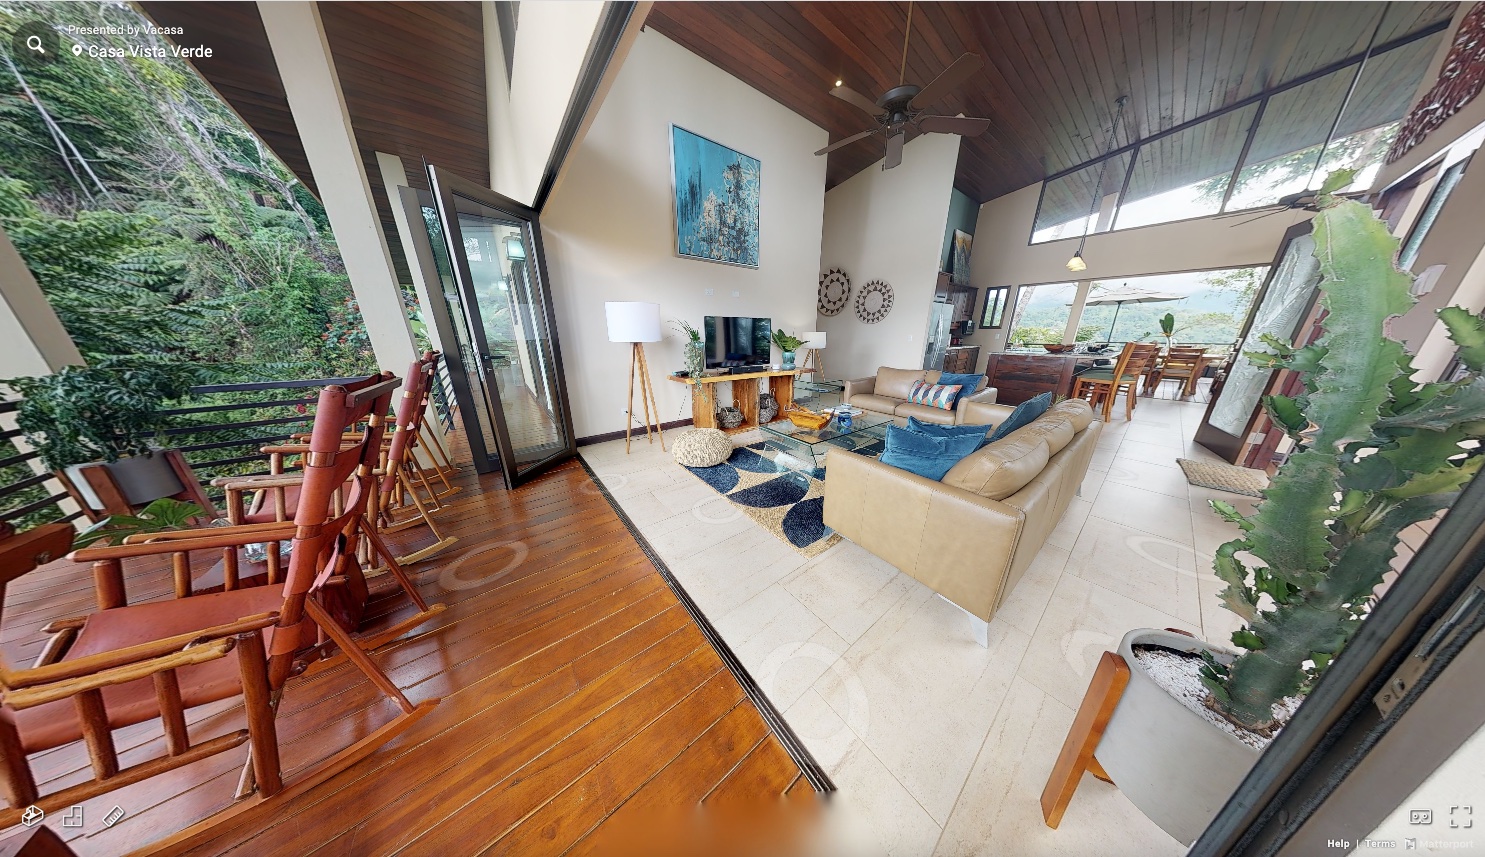 Image showing 3D virtual tour of a vacation property